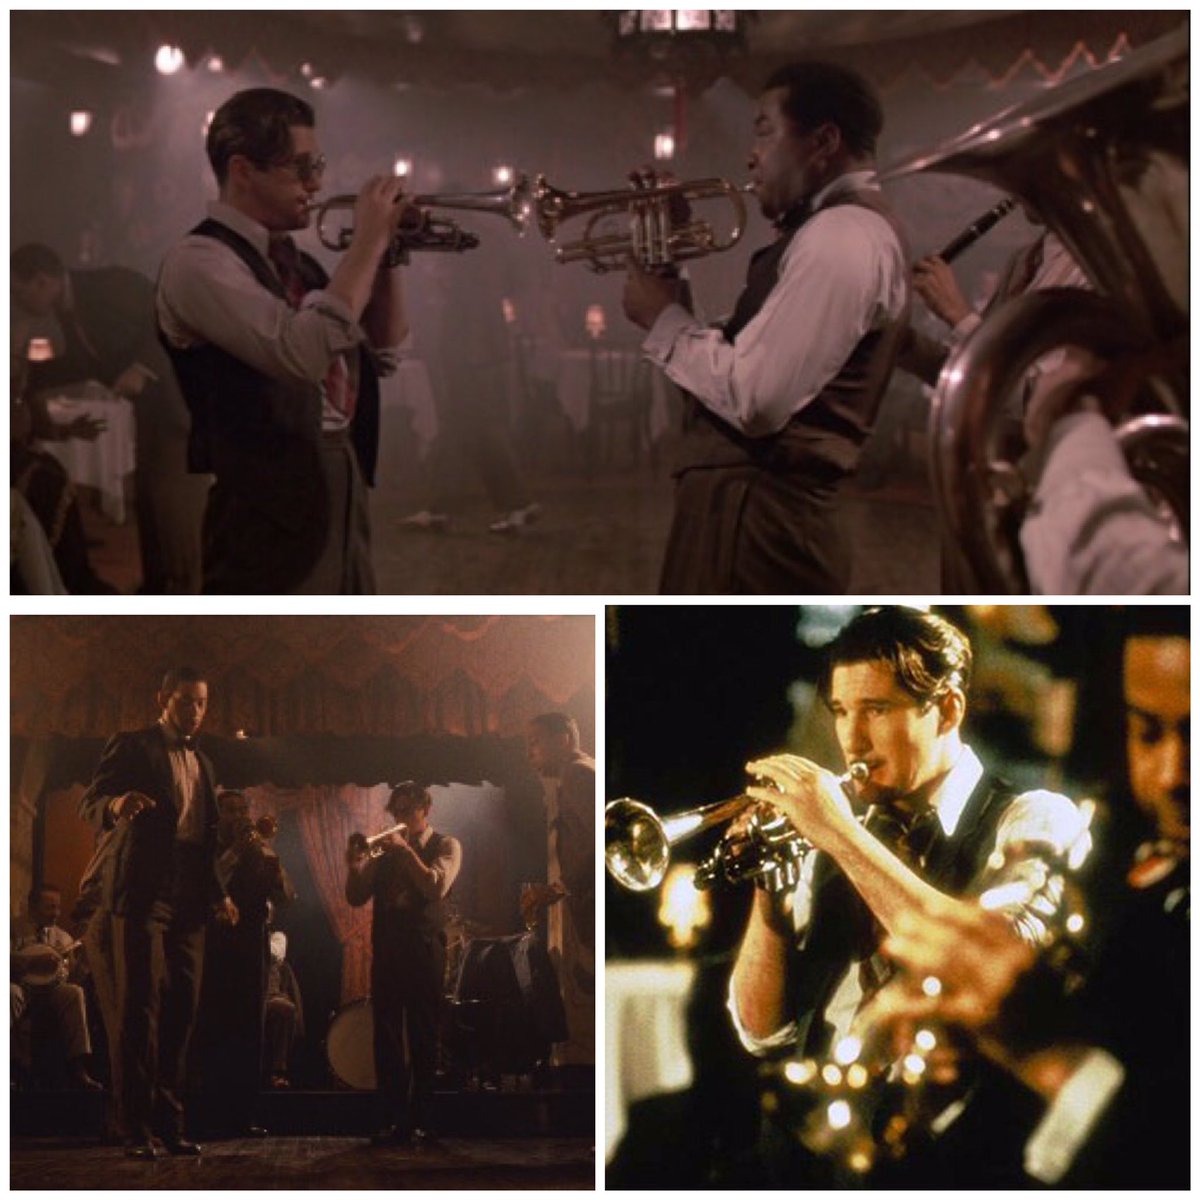 #Bales2020FilmChallenge
Day 23 Jazz performed in movie
#TheCottonClub (1984)